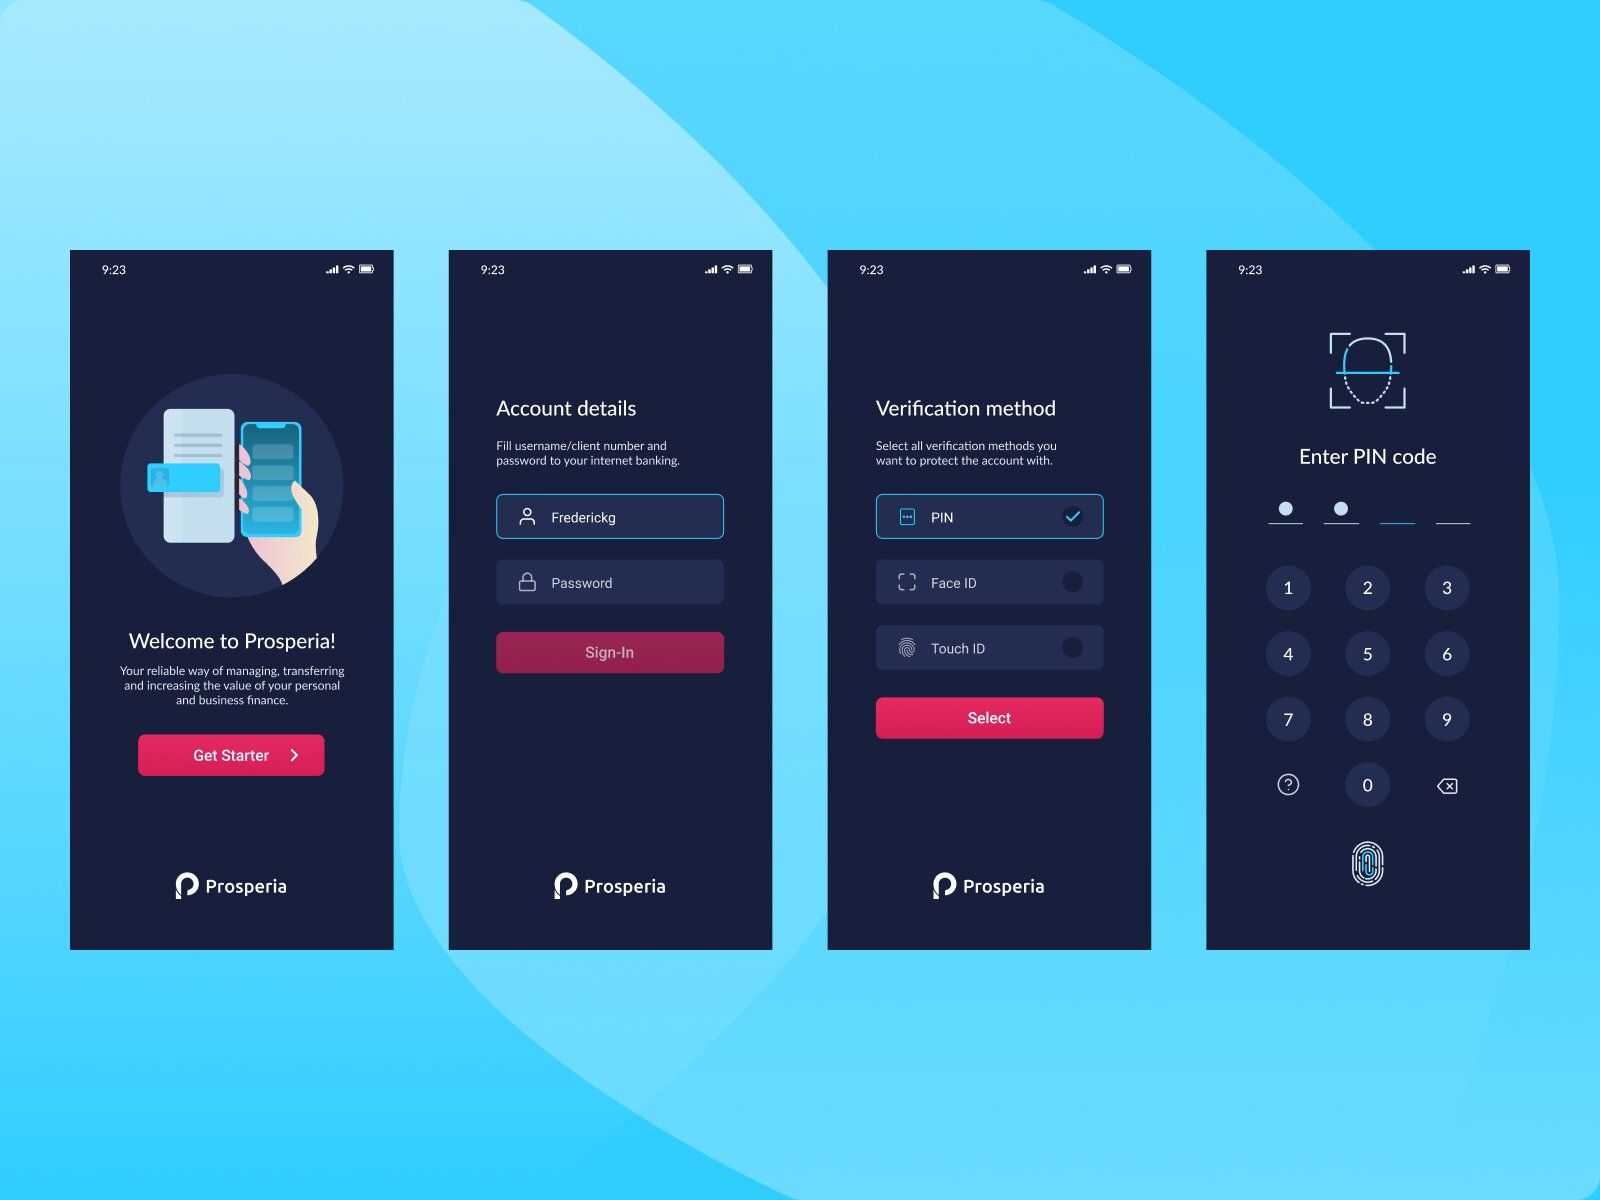 Any bank should make a sign up that’s convenient for mobile devices during mobile banking application development (*by [Jan Mráz](https://dribbble.com/janm_ux){ rel="nofollow" .default-md}*)